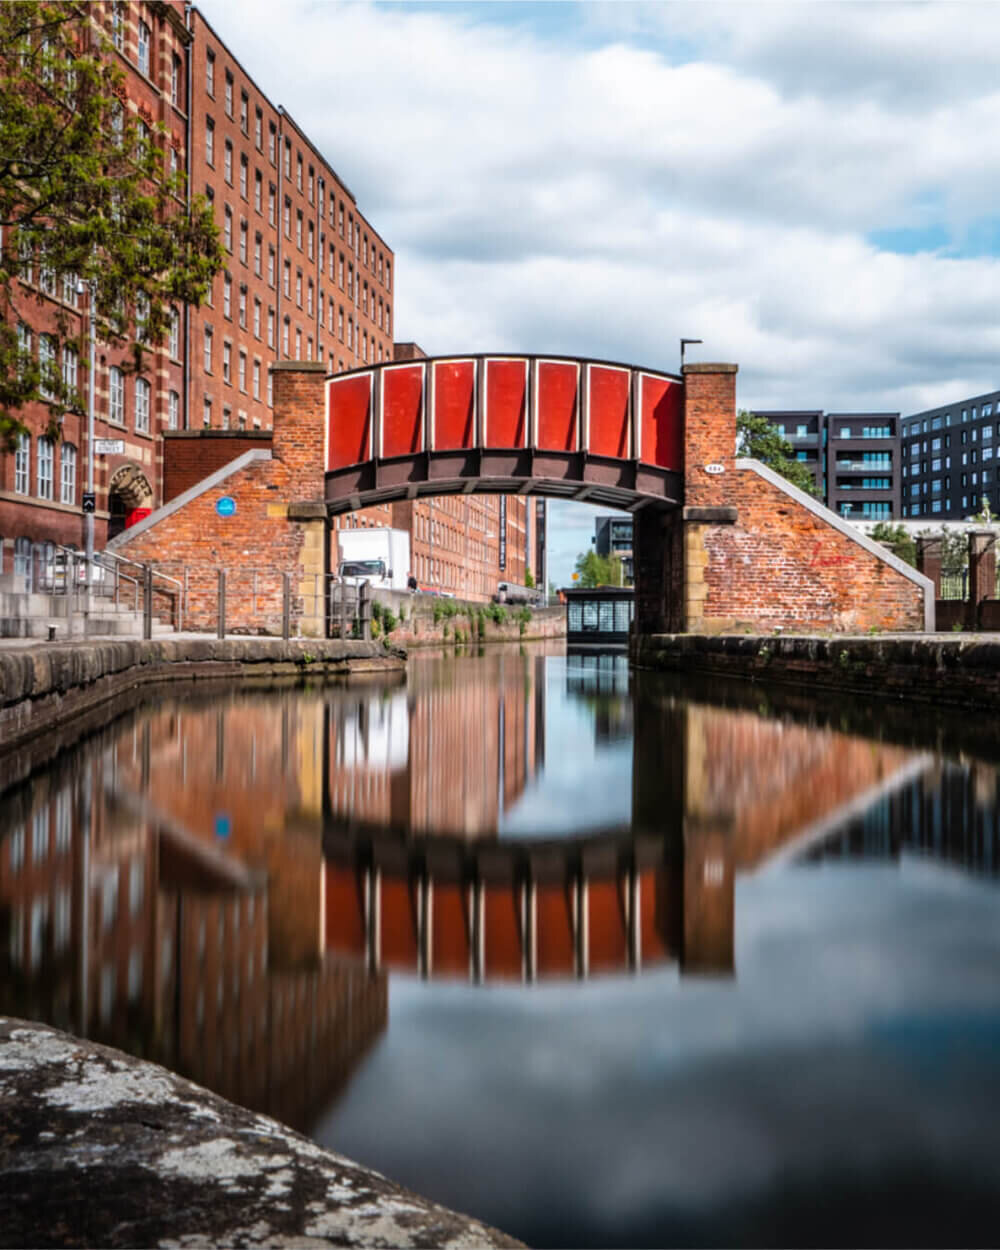 A red canal bridge which is a popular photography spot in Ancoats Manchester